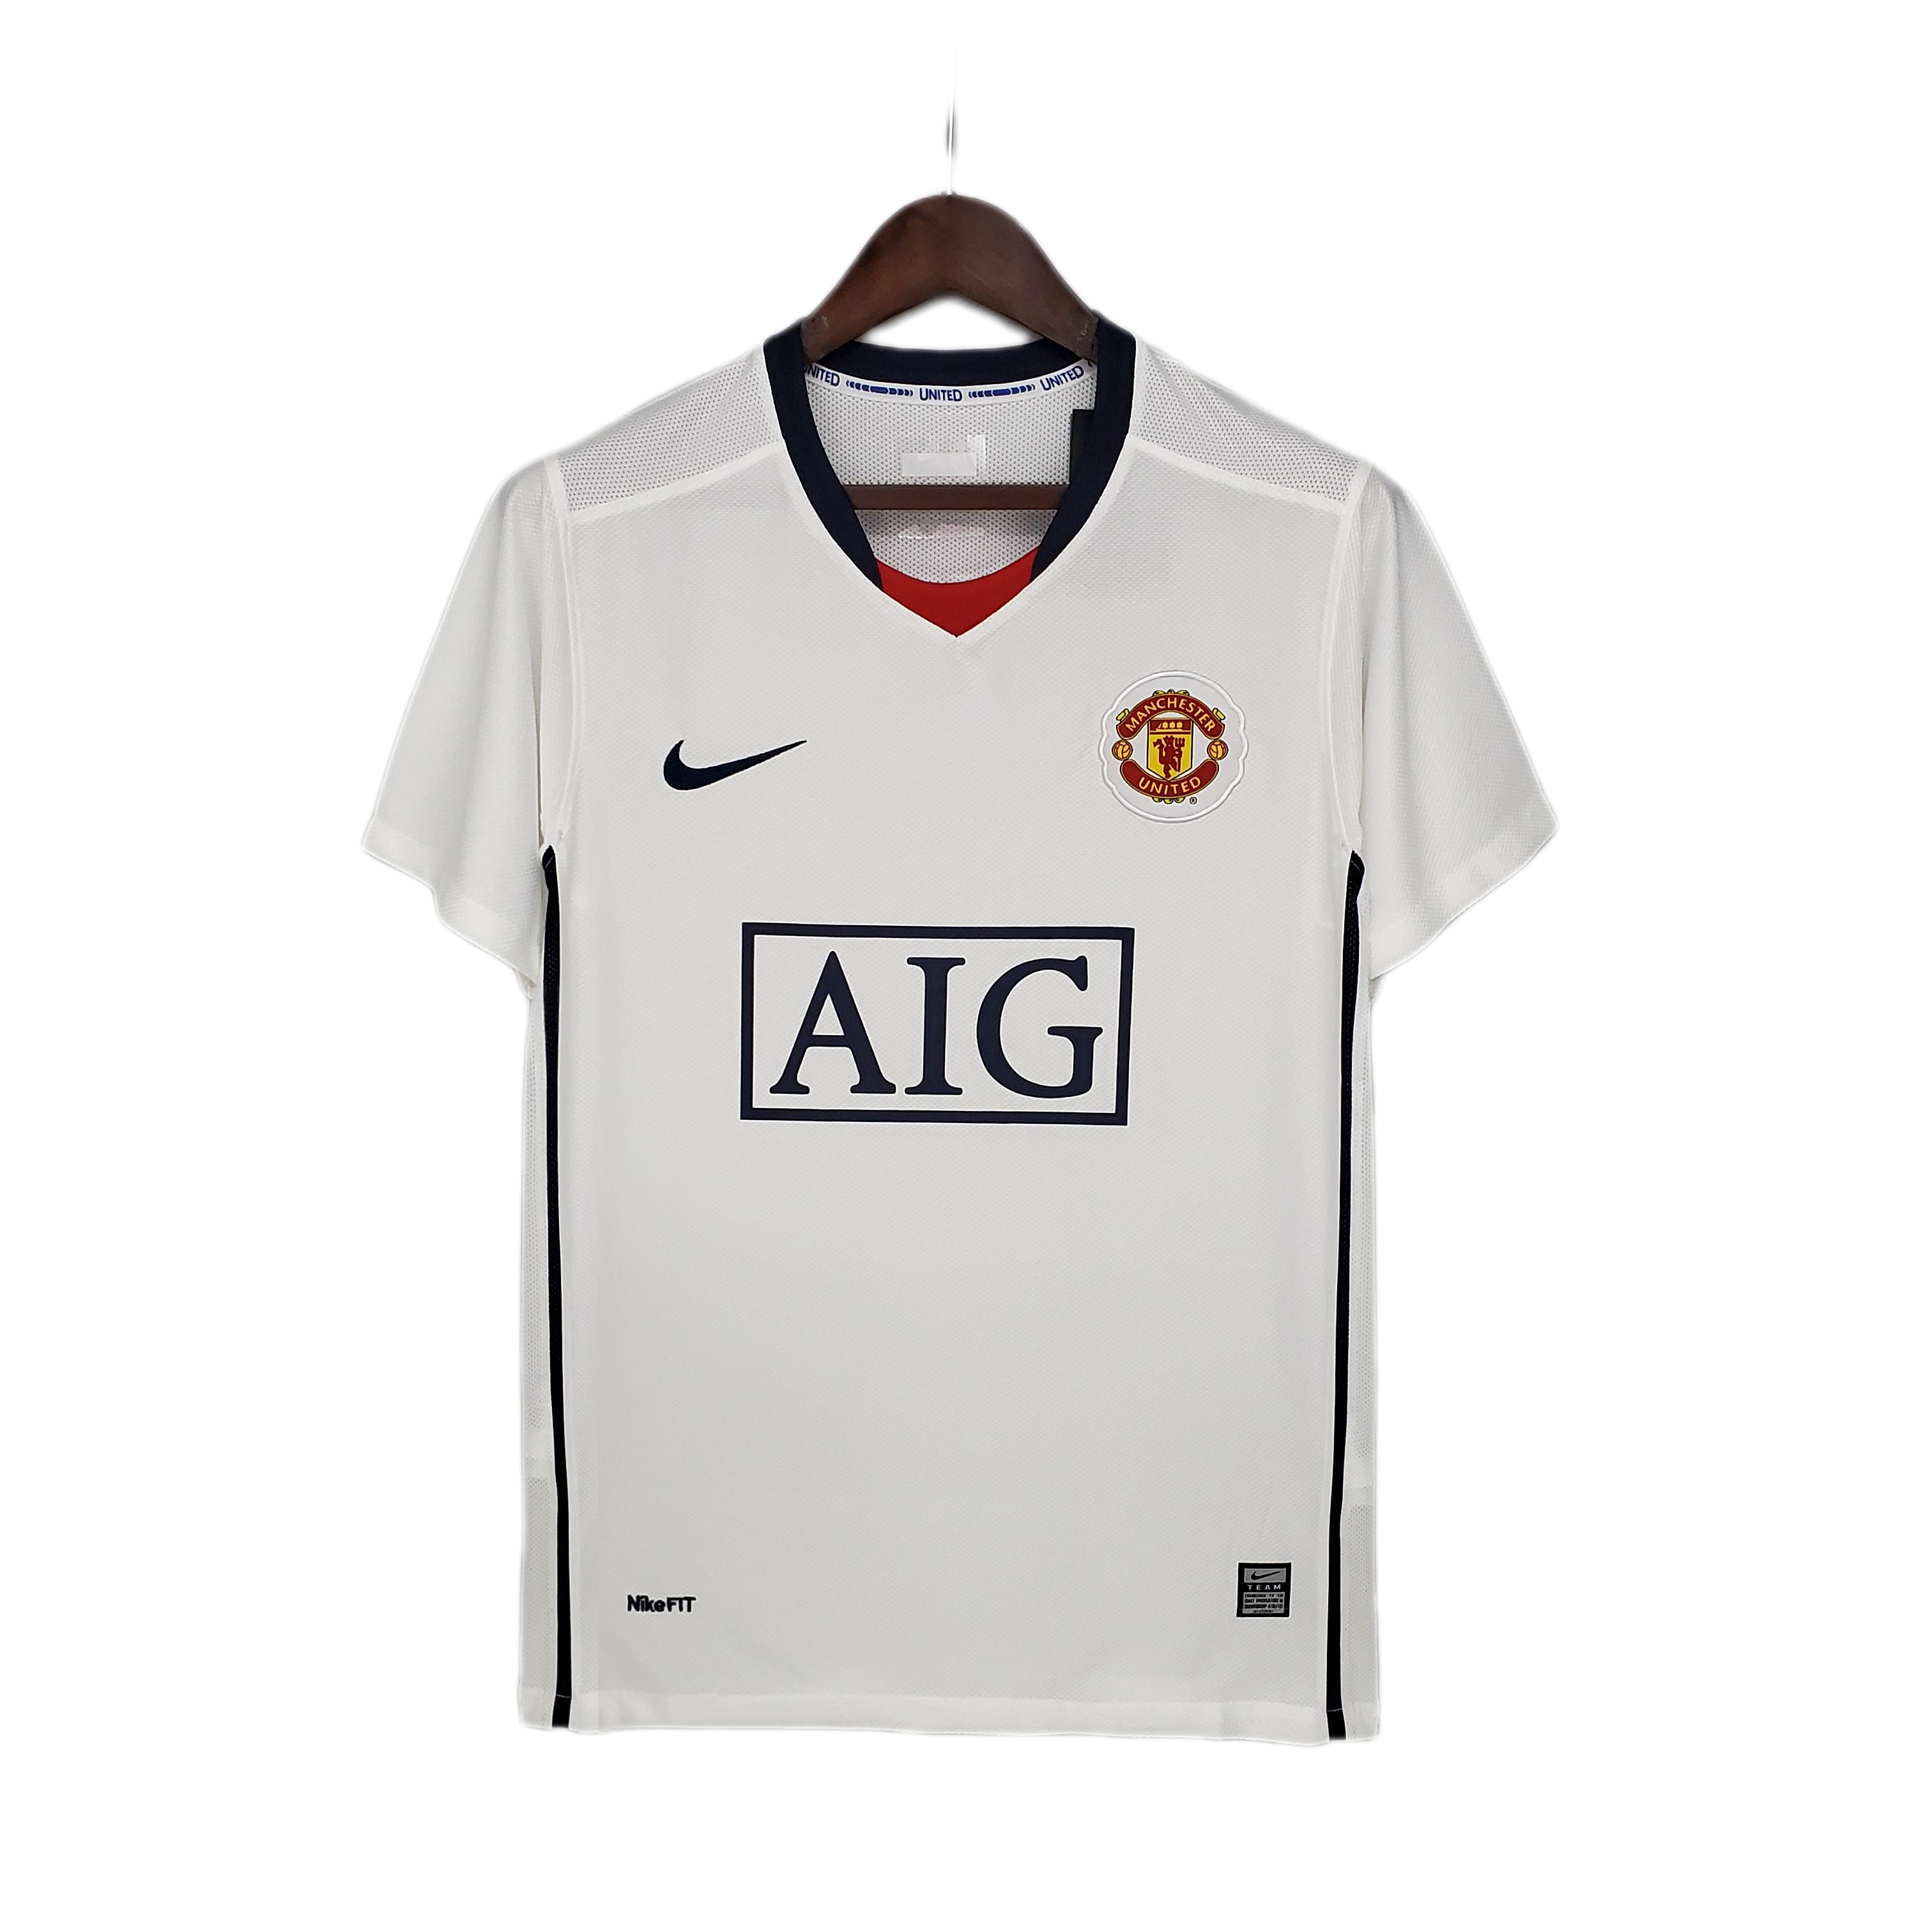 Retro Manchester United 08/09 League Edition away White Soccer Jersey